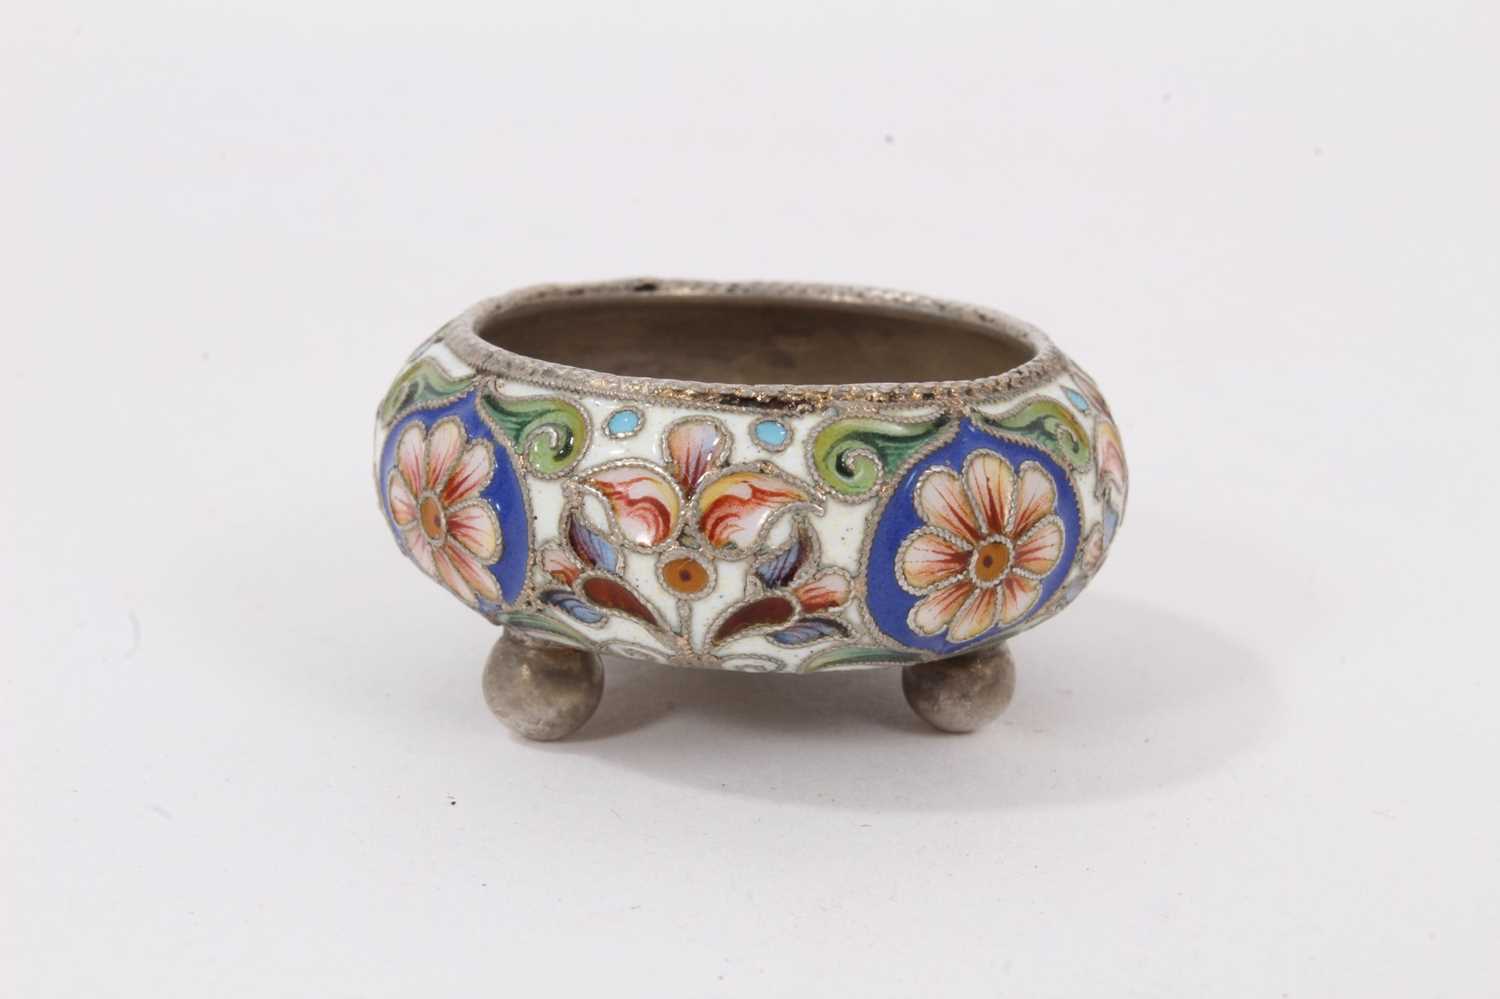 Late 19th/early 20th century Russian cloisonné salt